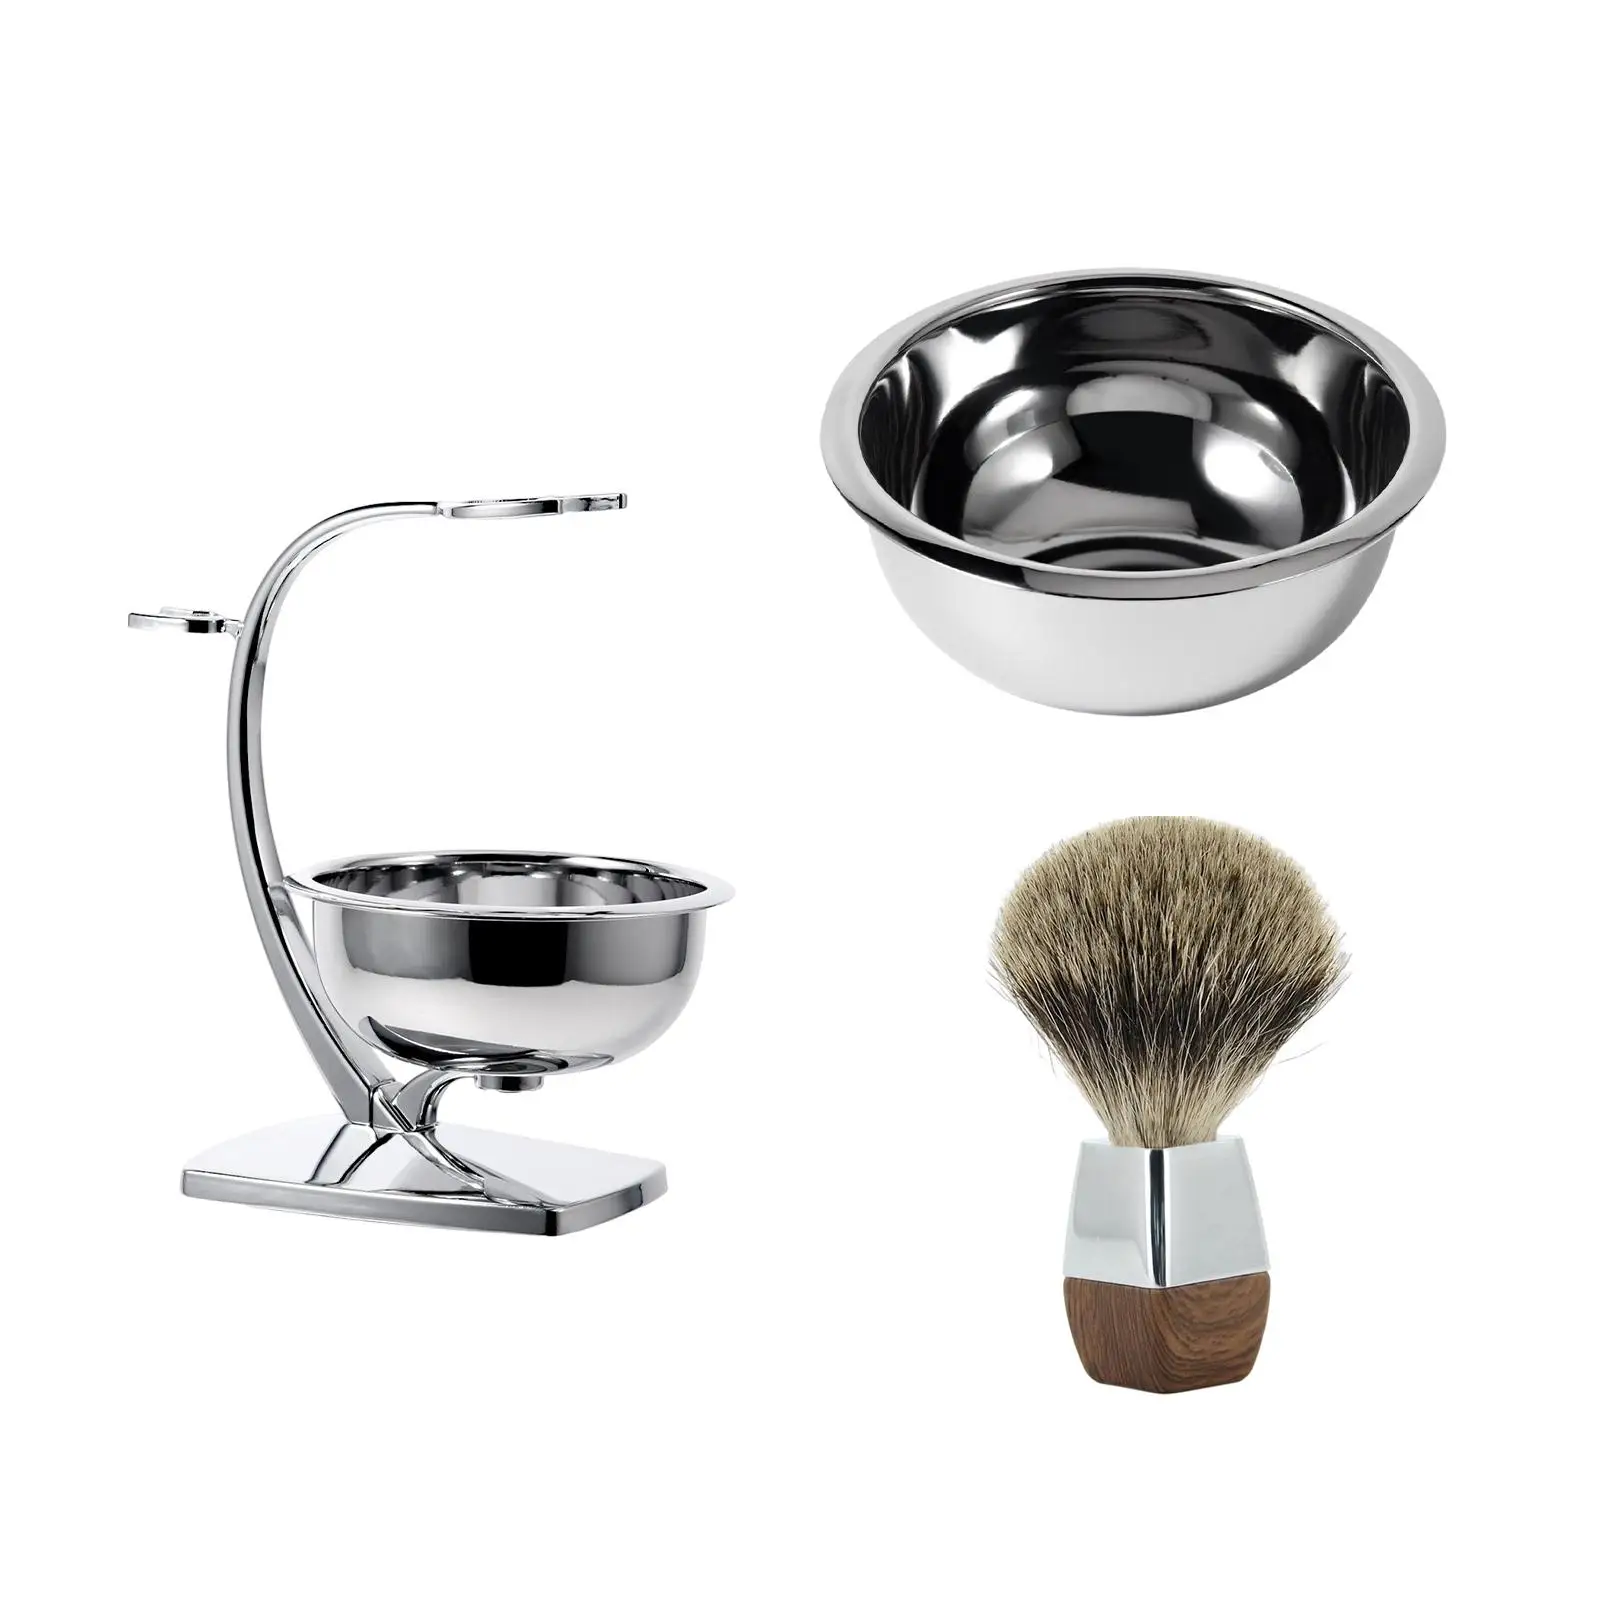 High Quality Shaving Set Grooming Gift Stainless Steel for Father Husband Barber Birthday Festival